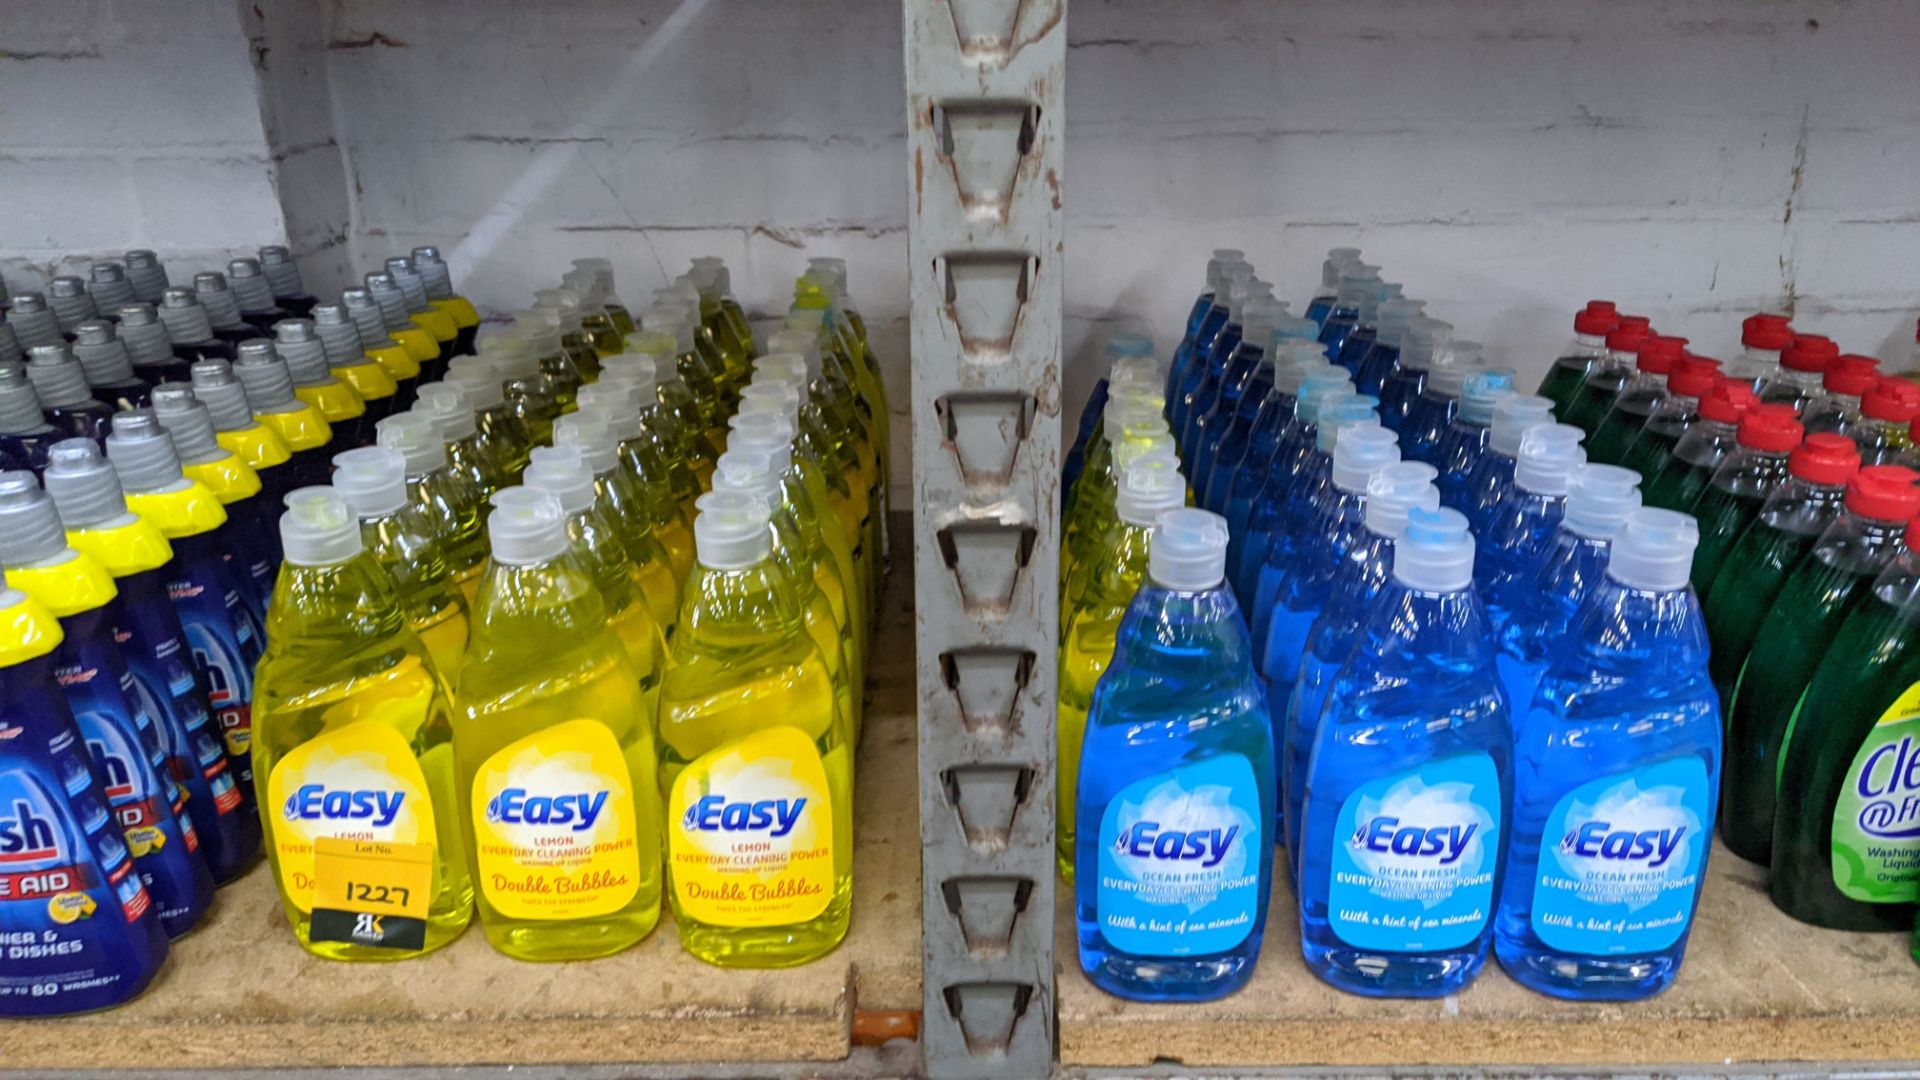 58 off 550ml bottles of Easy washing up liquid. IMPORTANT – DO NOT BID BEFORE READING THE